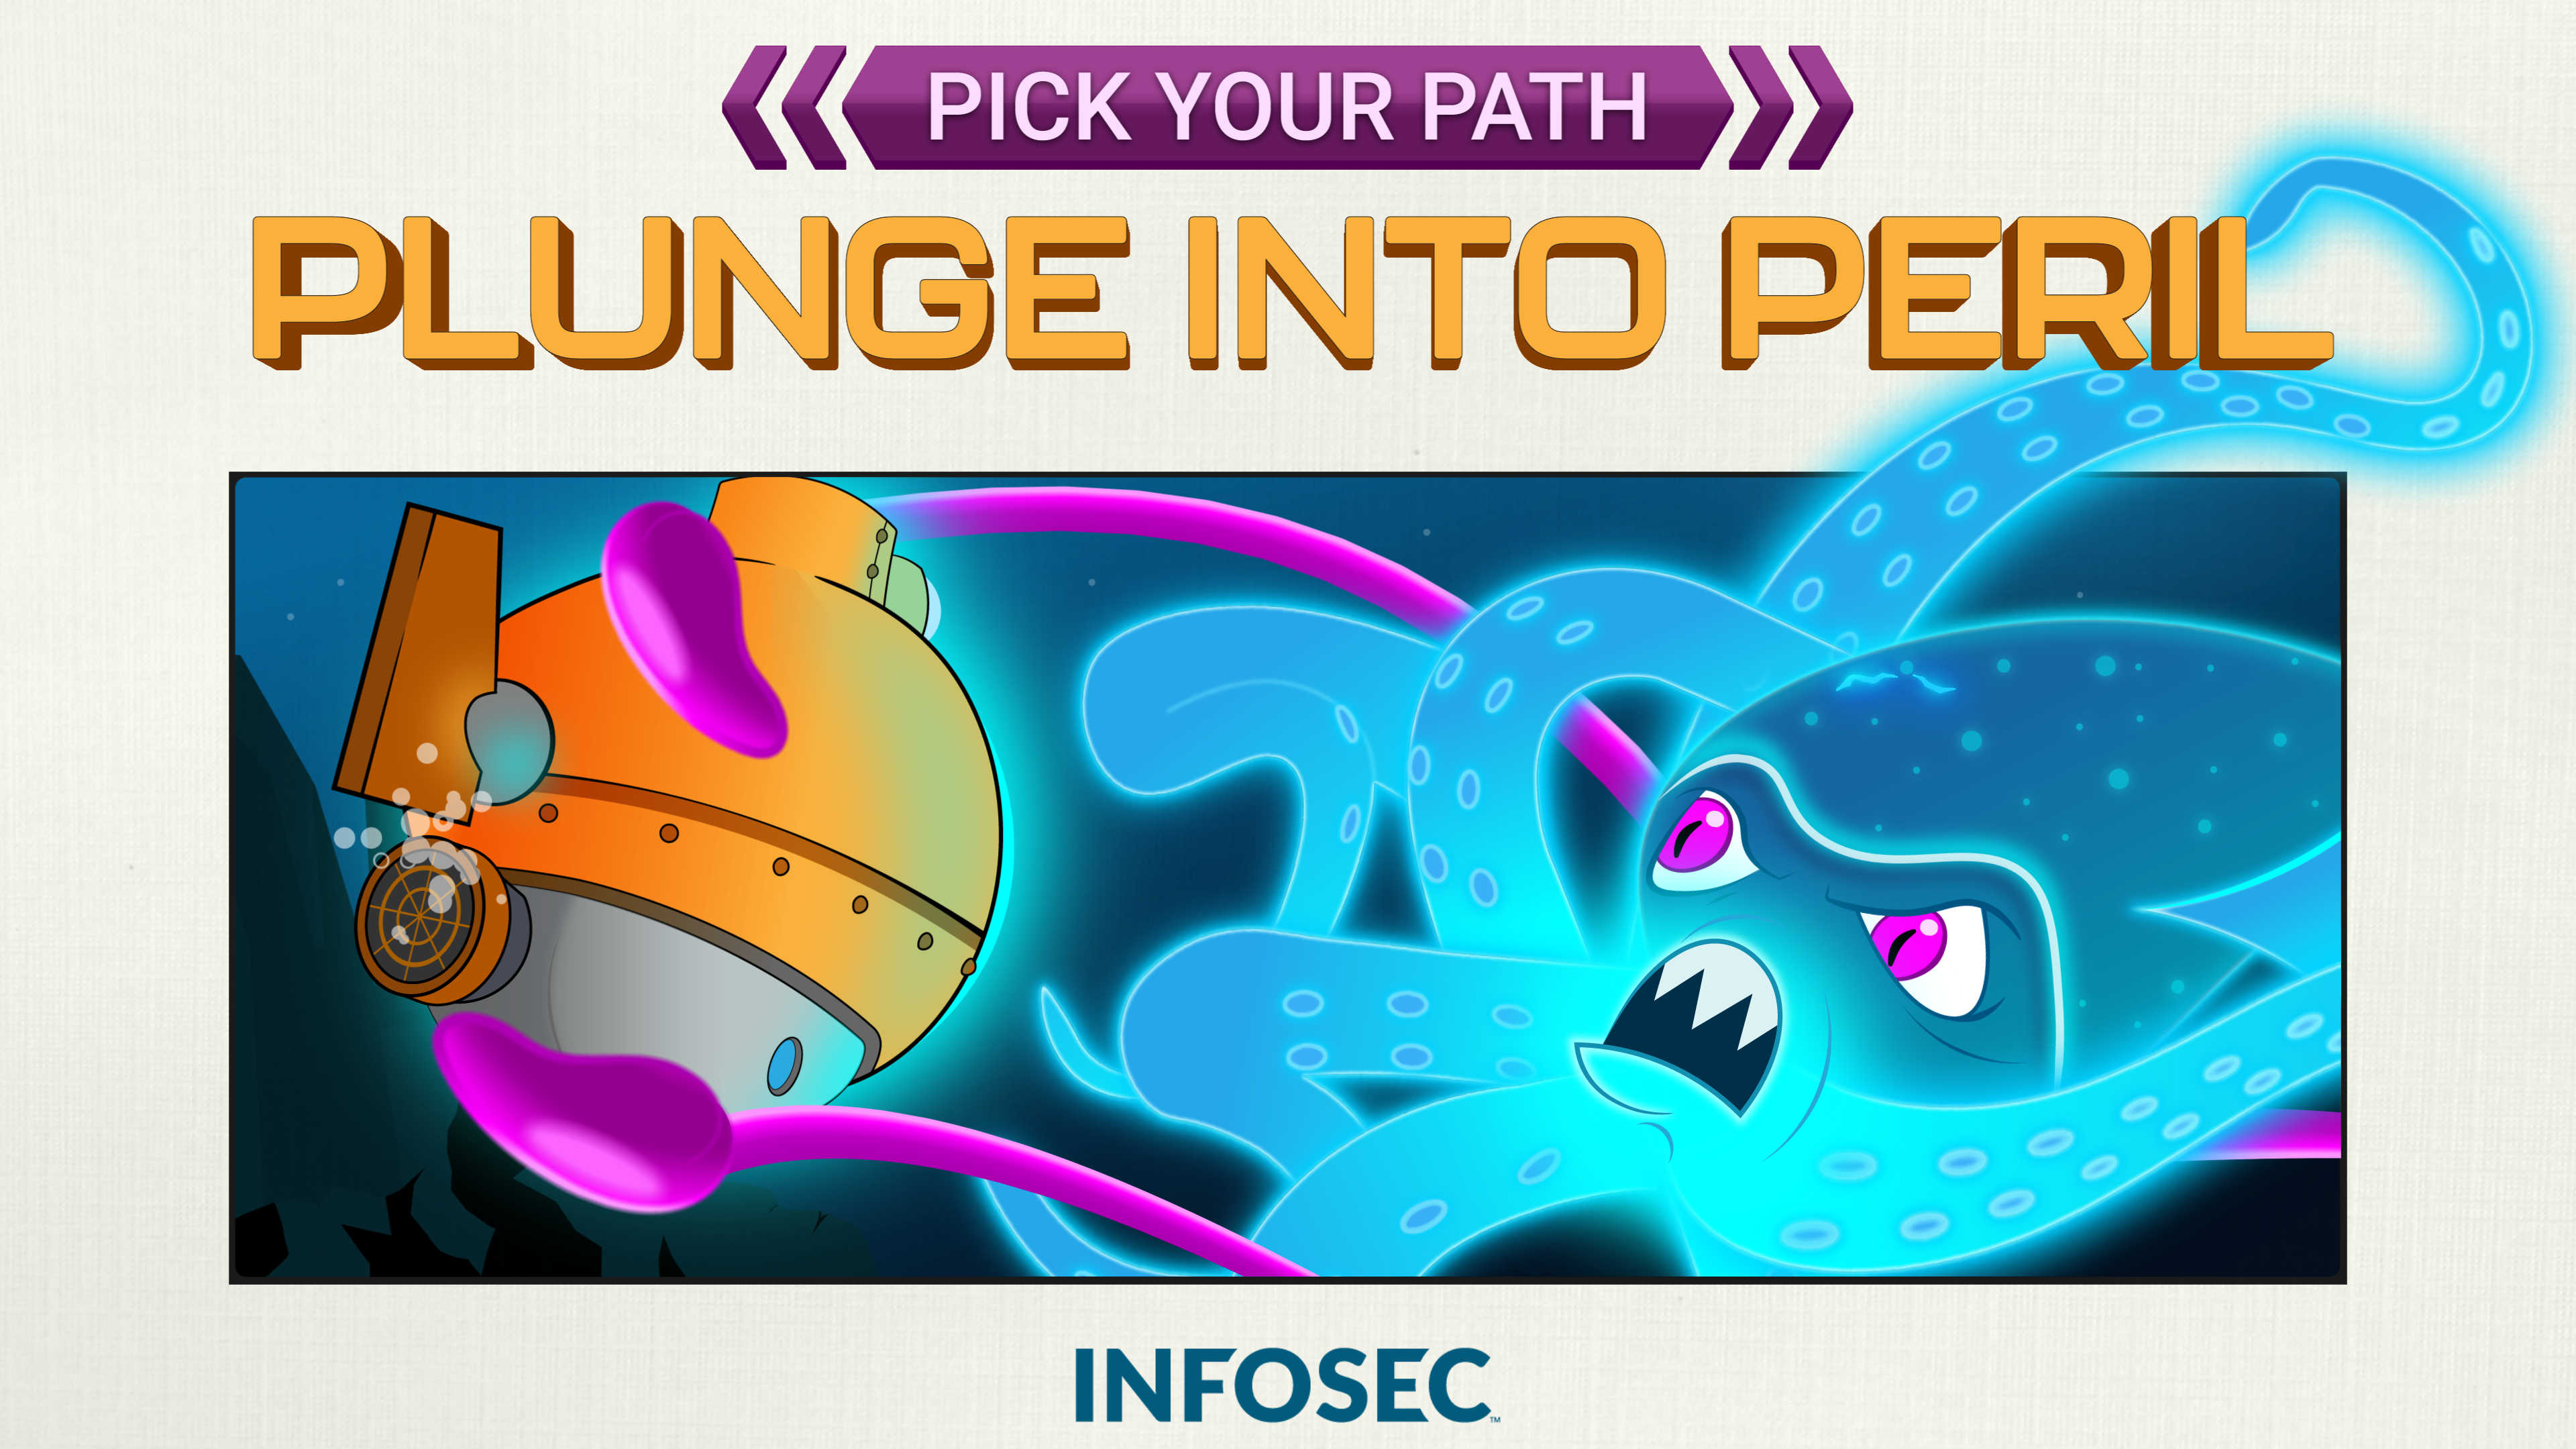 Pick Your Path: Plunge into Peril